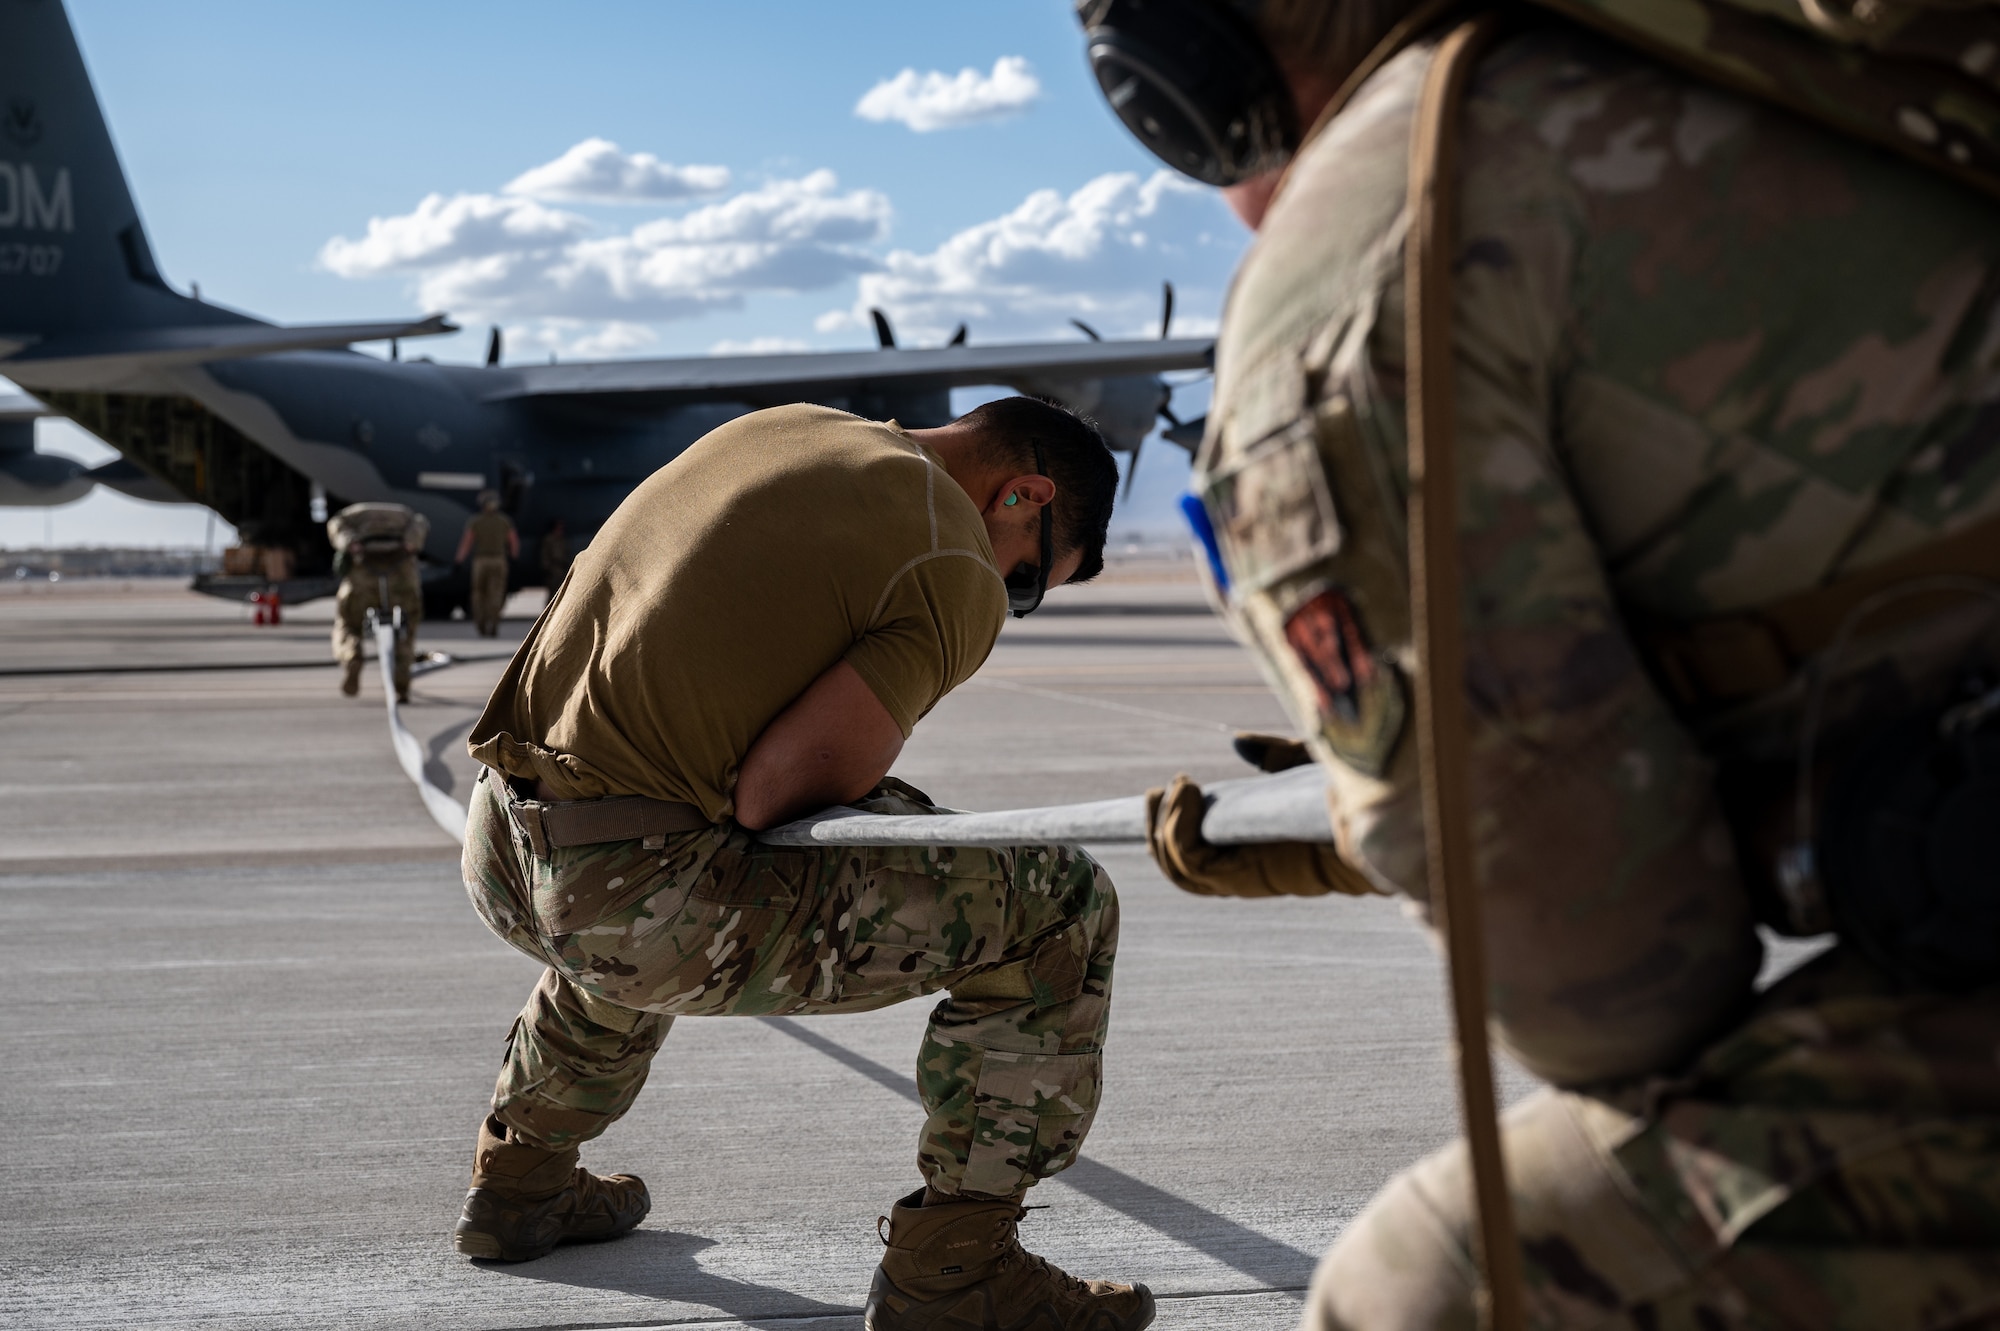 Airmen assigned to the 355th Logistics Readiness Squadron's Petroleum, Oil and Lubricants section, Davis-Monthan Air Force Base, Arizona, pack up the equipment used in Forward Area Refueling Point (FARP) training during Black Flag 22-1 at Nellis Air Force Base, Nevada, May 11, 2022. As part of Agile Combat Employment, FARP training prepares Airmen to effectively refuel aircraft in austere locations when air-to-air refueling is not possible or when fueling stations are not accessible. (U.S. Air Force photo by Airman 1st Class Josey Blades)